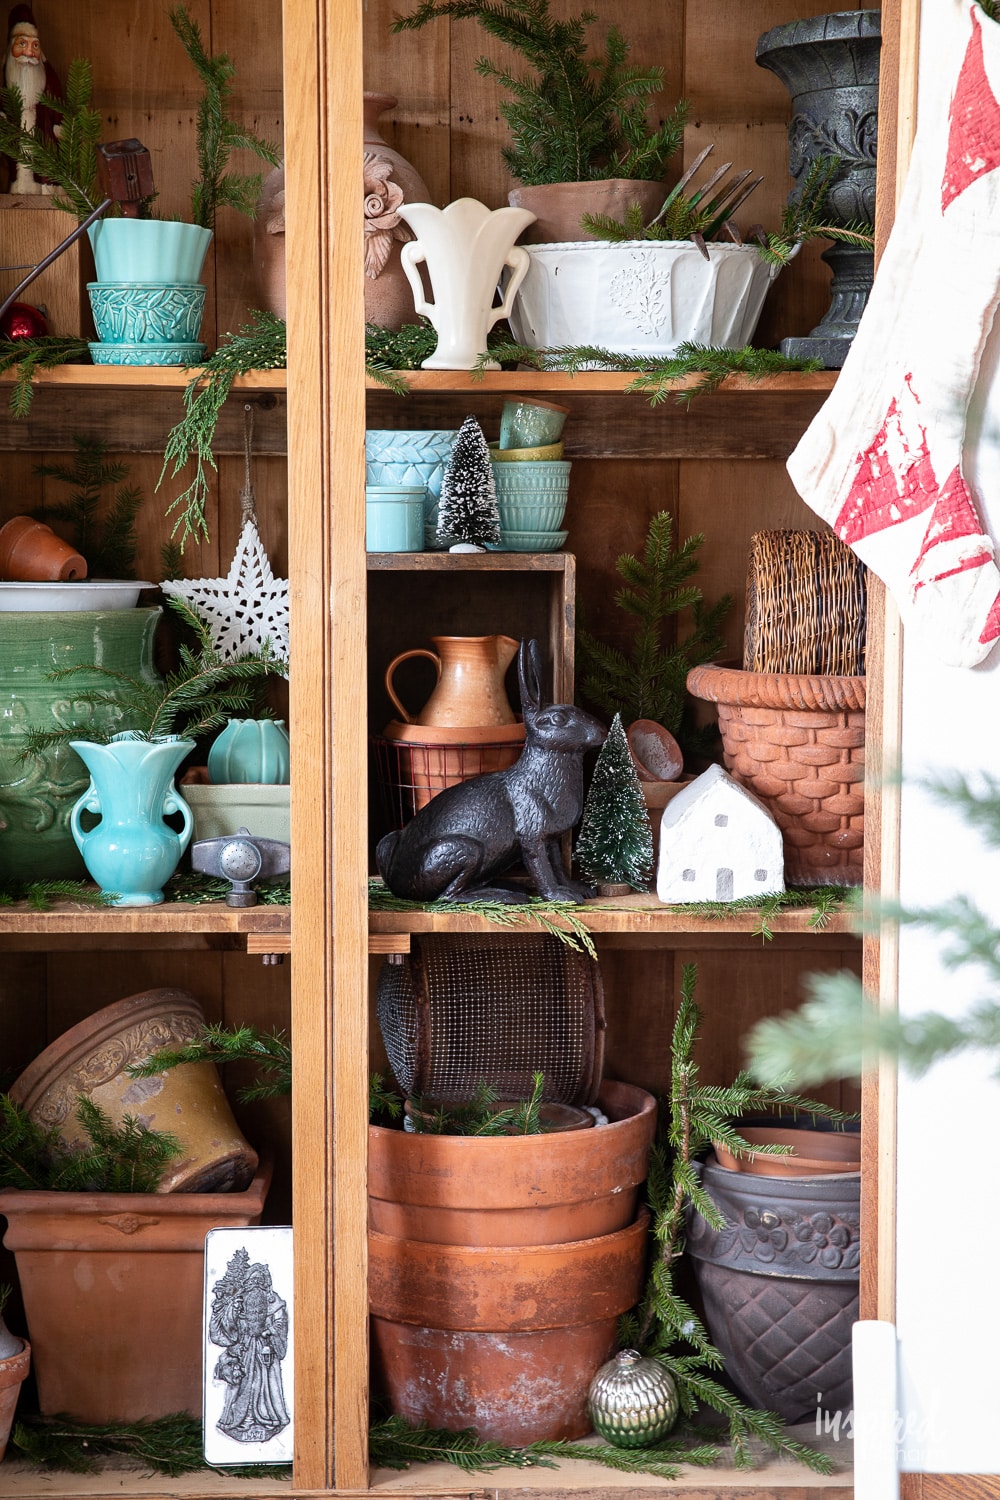 pine shed filled with pots, pine, and garden decor.